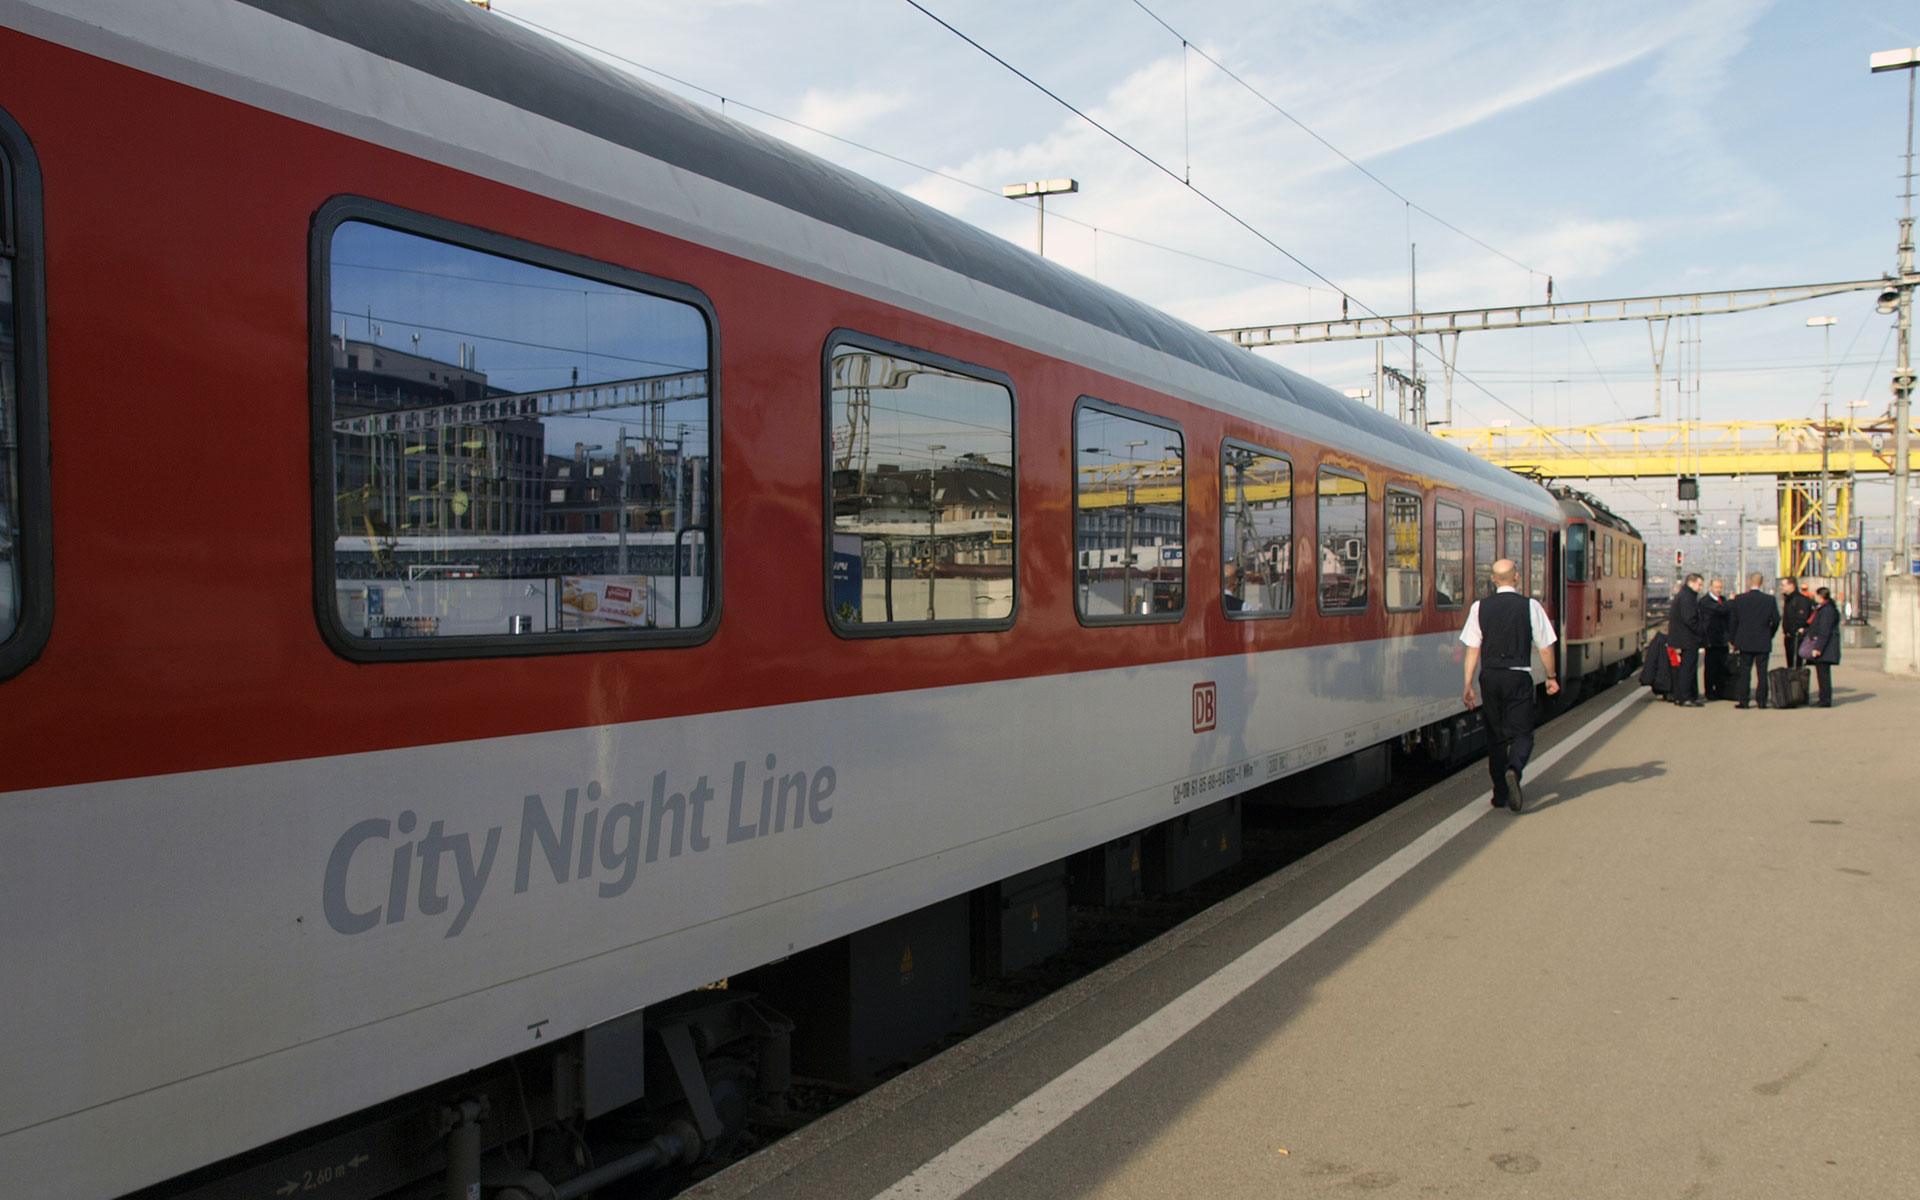 A City Night Line train from Berlin reaches its final destination at Zürich HB station. The last CNL departure from Berlin on this route is on Thursday 8 December 2016 (photo © hidden europe).